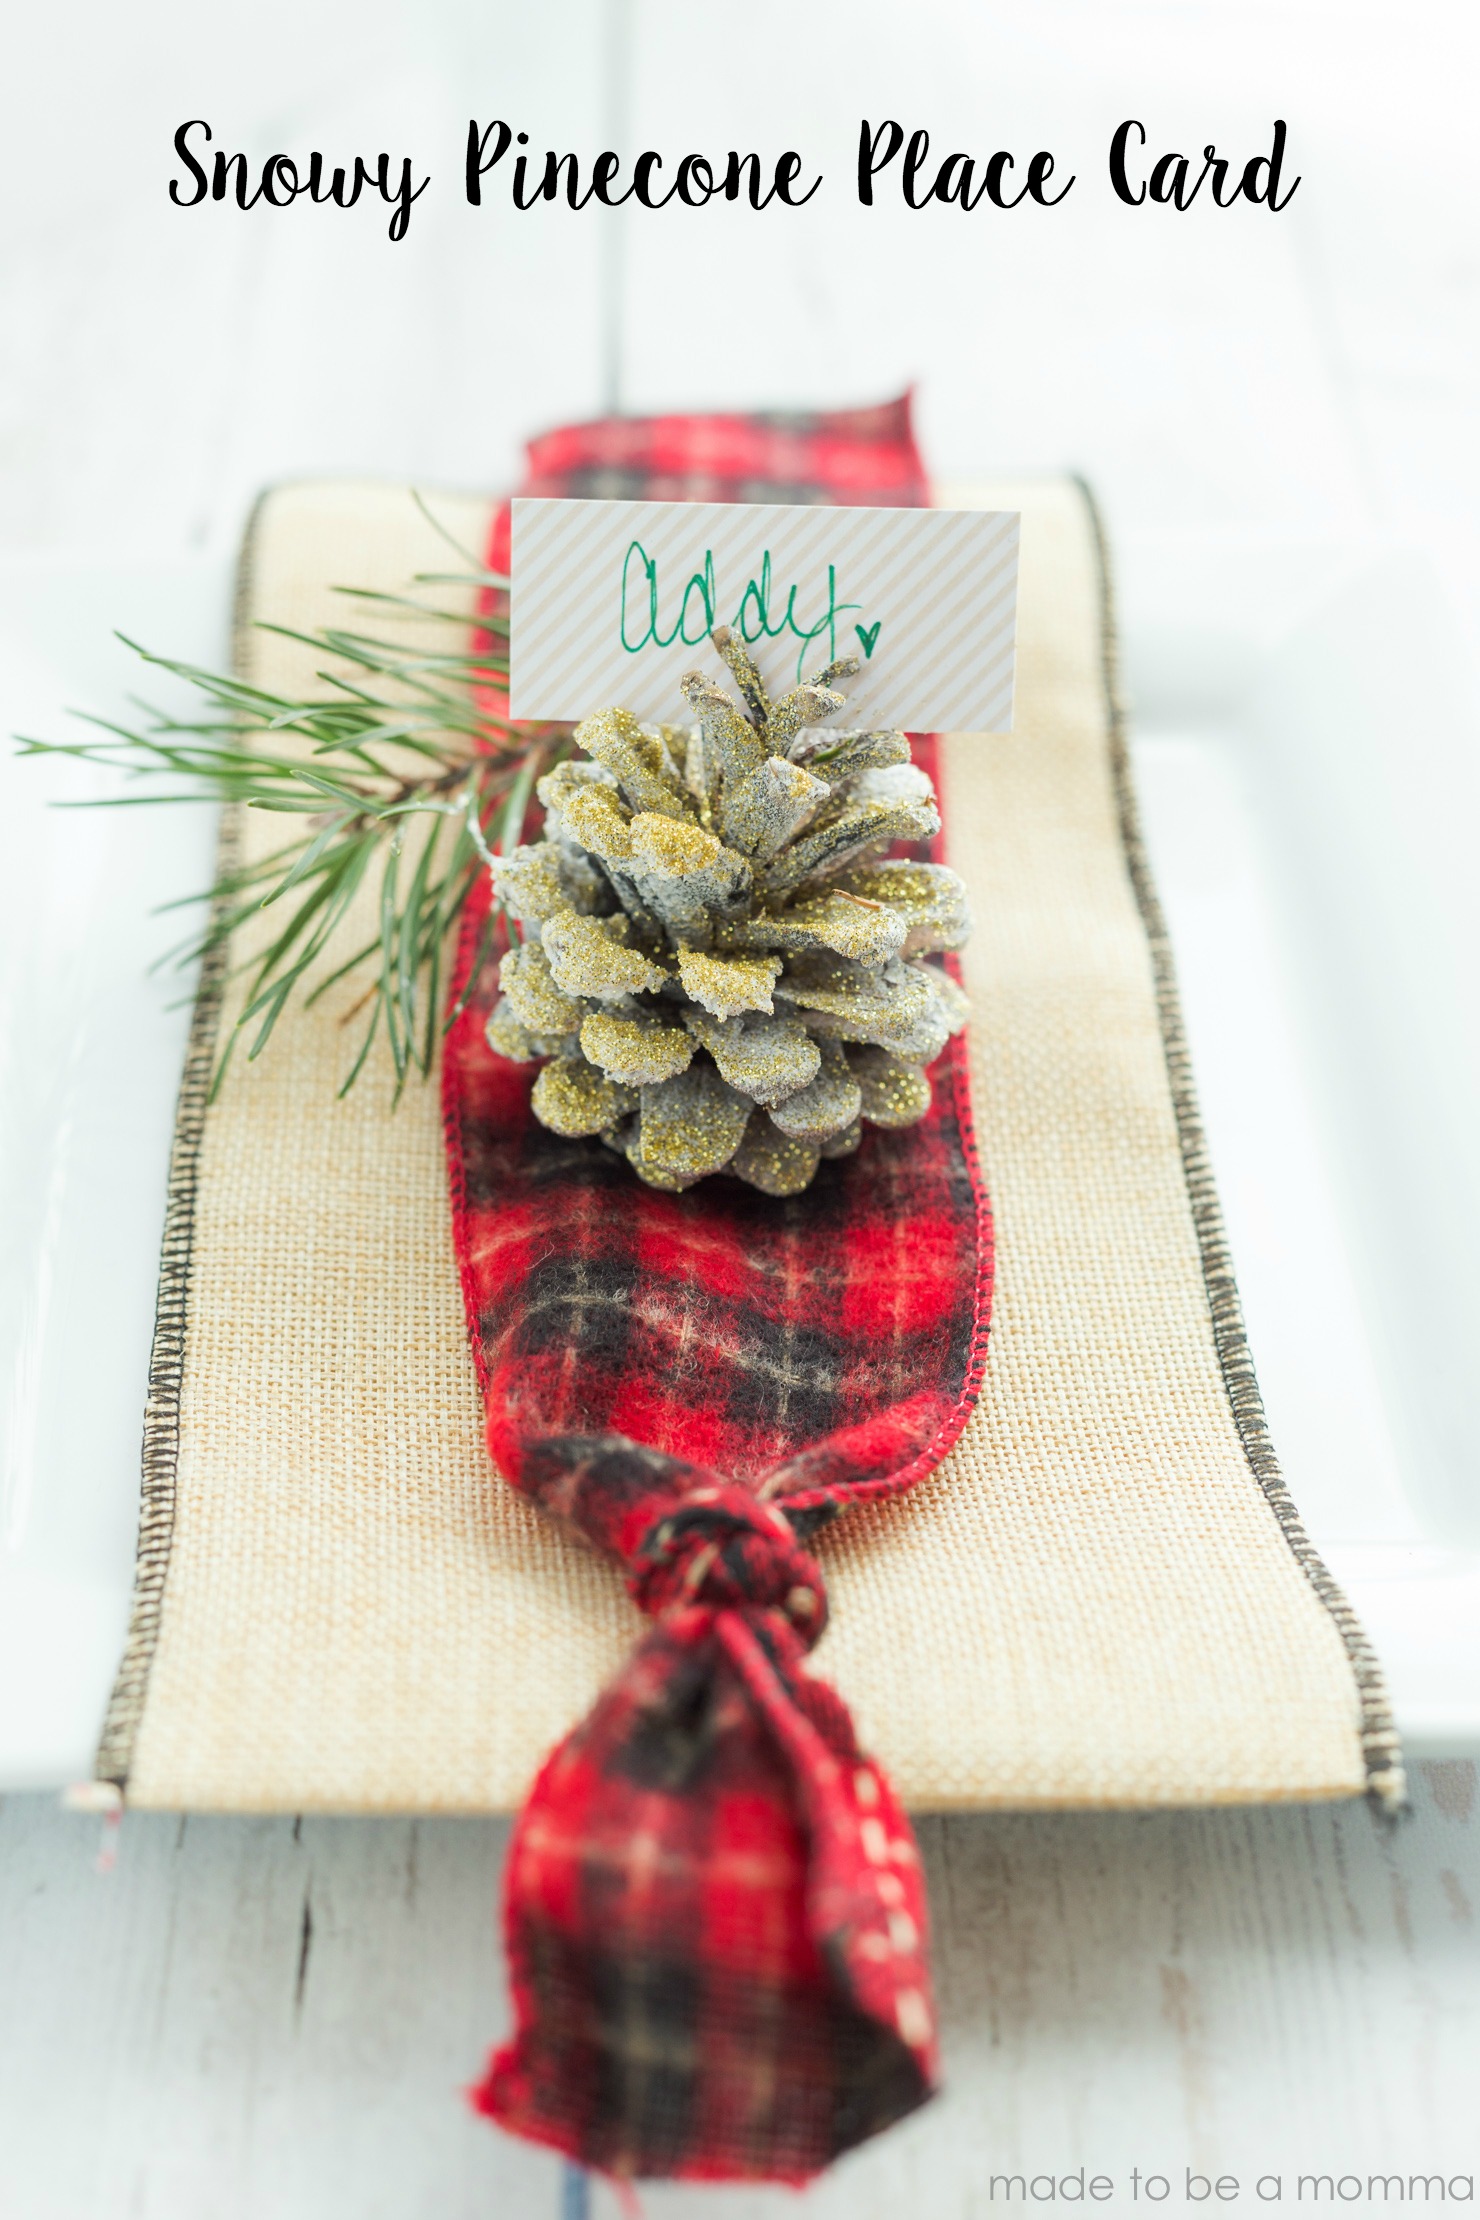 Snowy Pinecone Place Card